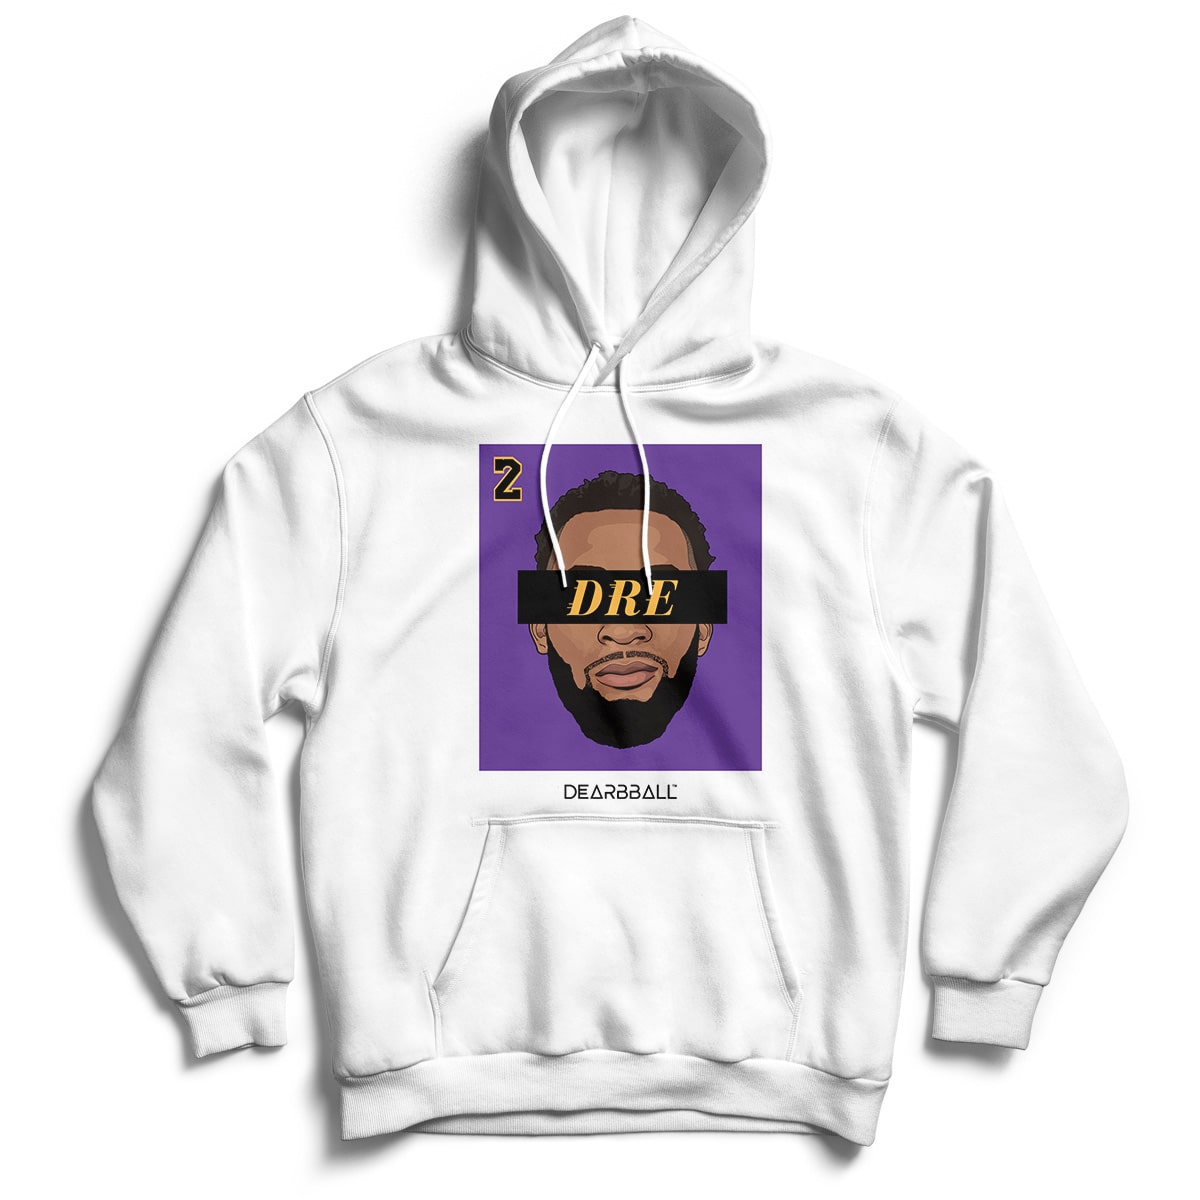 Andre Drummond Hoodie - DRE 2 purple Los Angeles Lakers Basketball Dearbball white